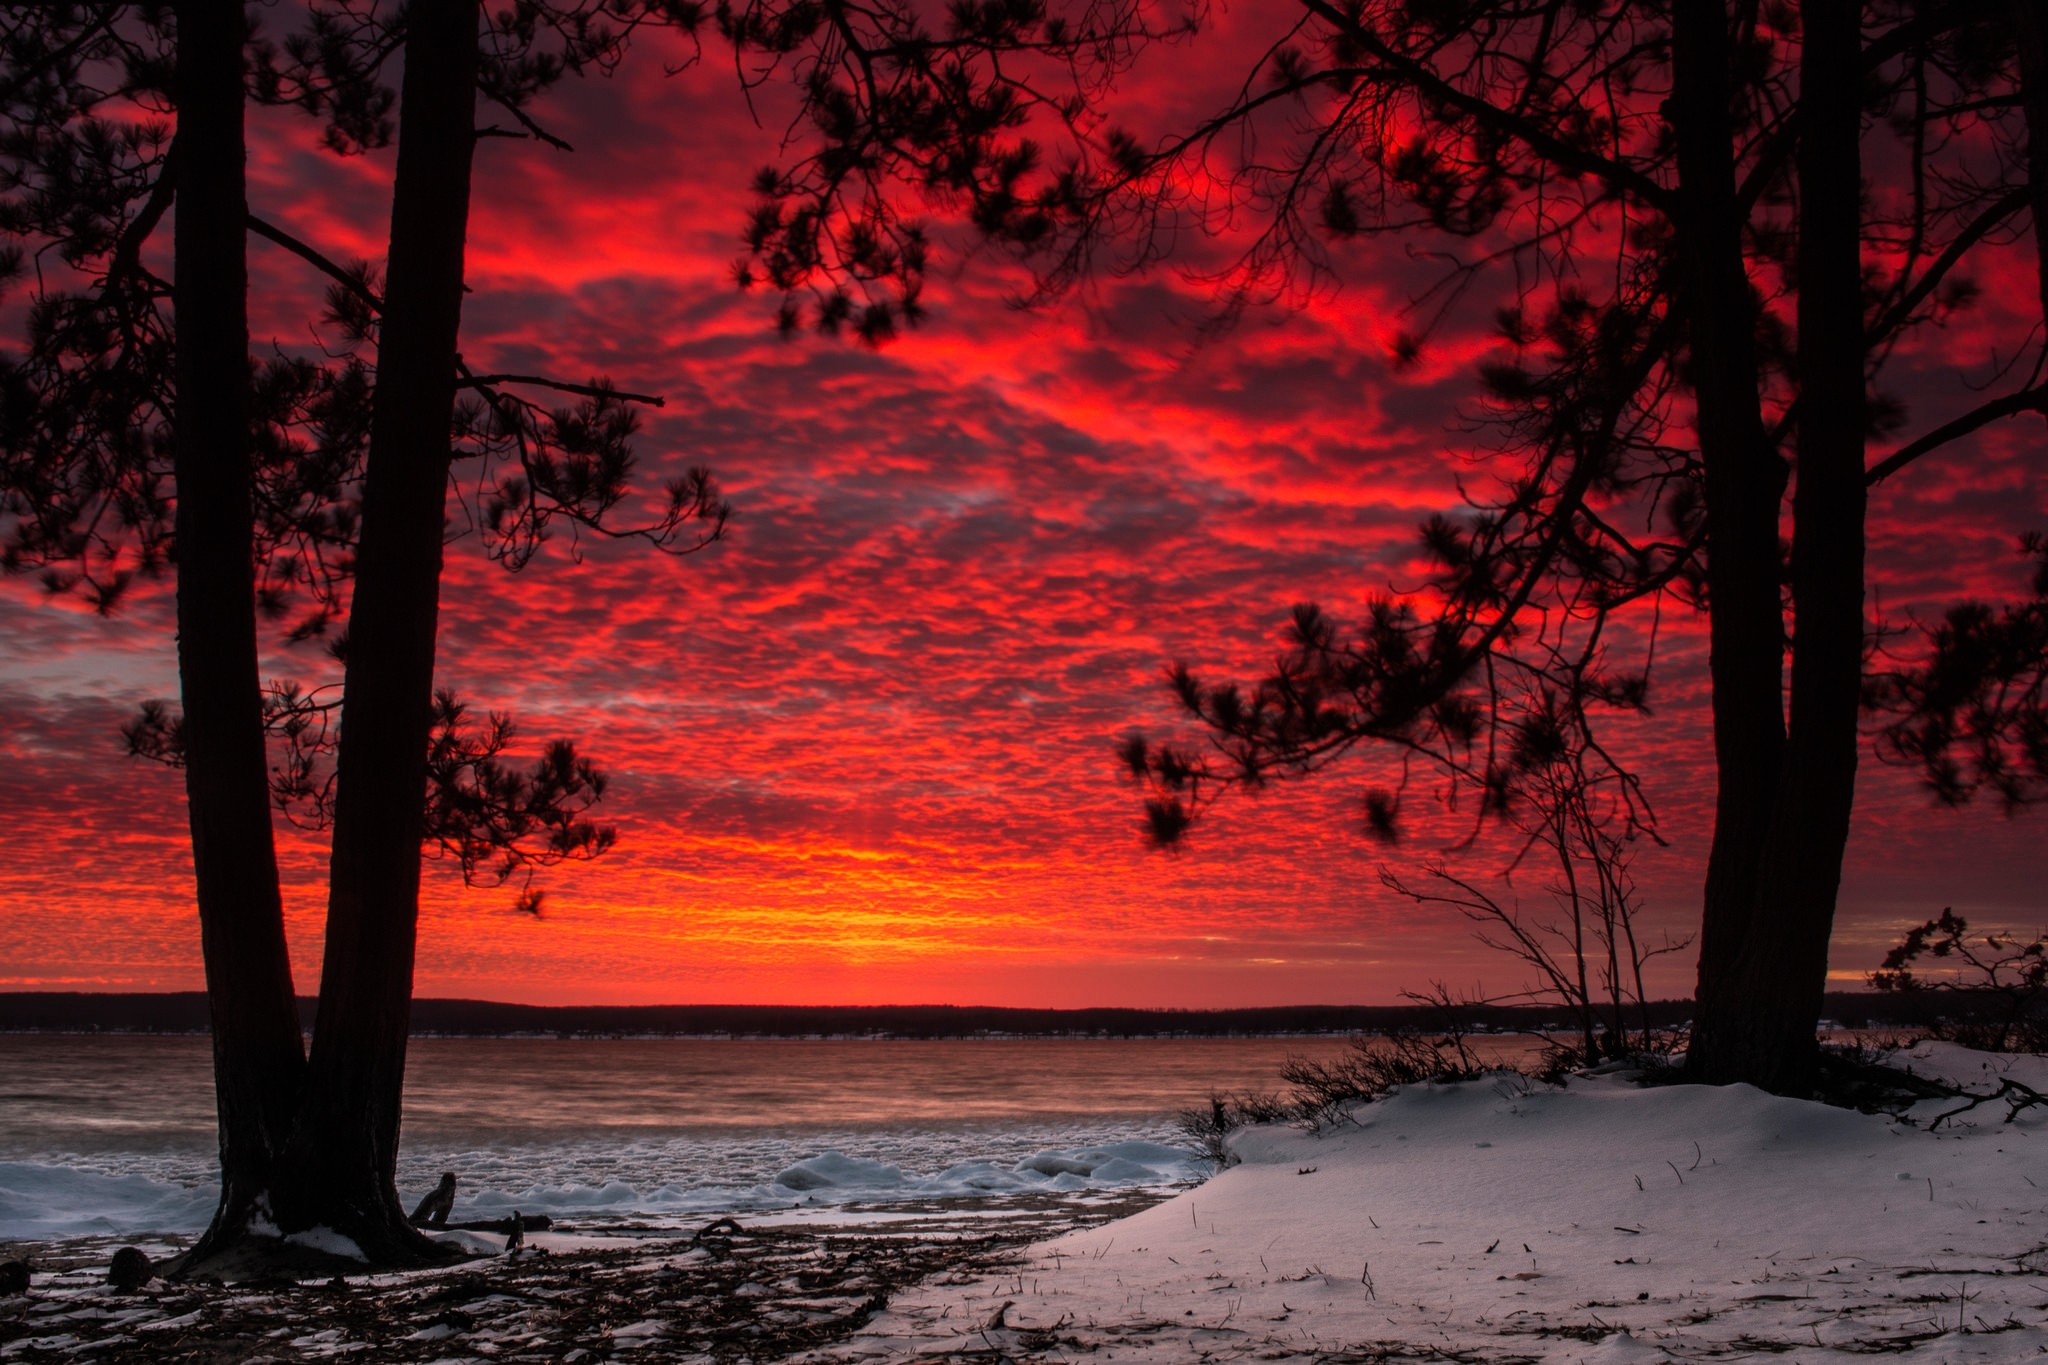 General 2048x1365 landscape snow sunset red clouds nature sky sunlight winter